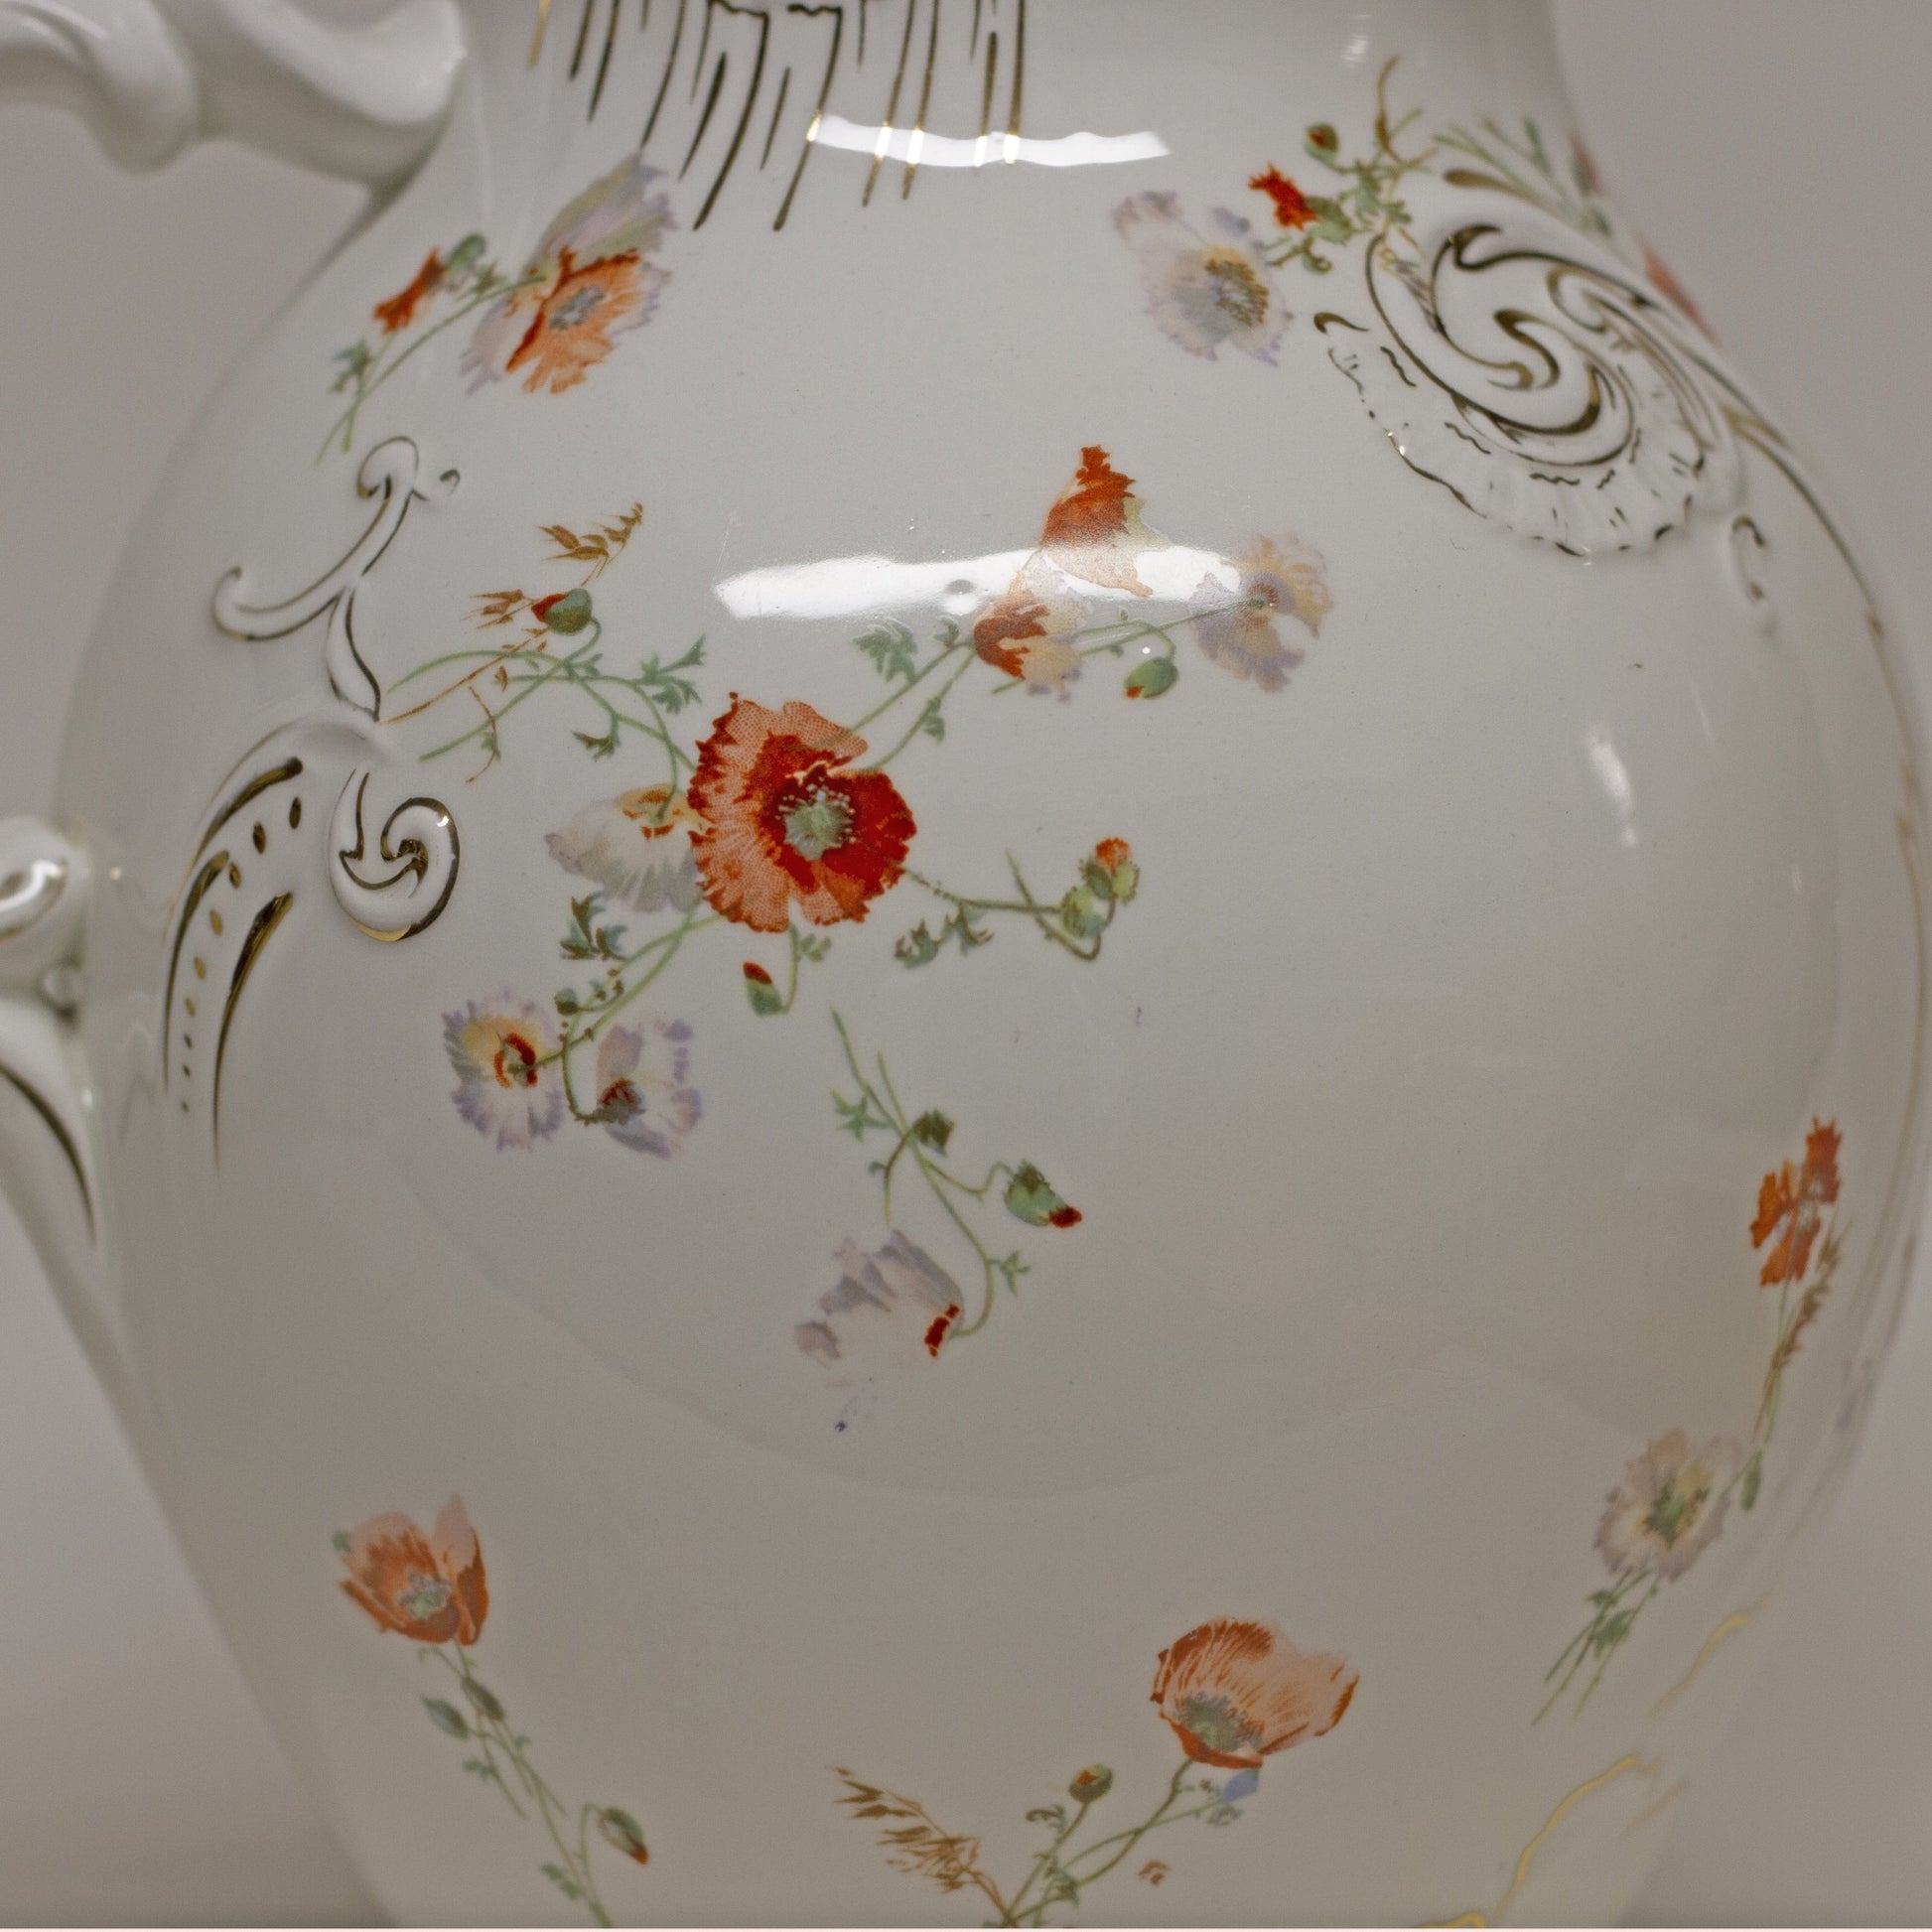 DOULTON BURSLEM Large Water Pitcher with Poppies and Gold Gilt Circa 1891 to 1902